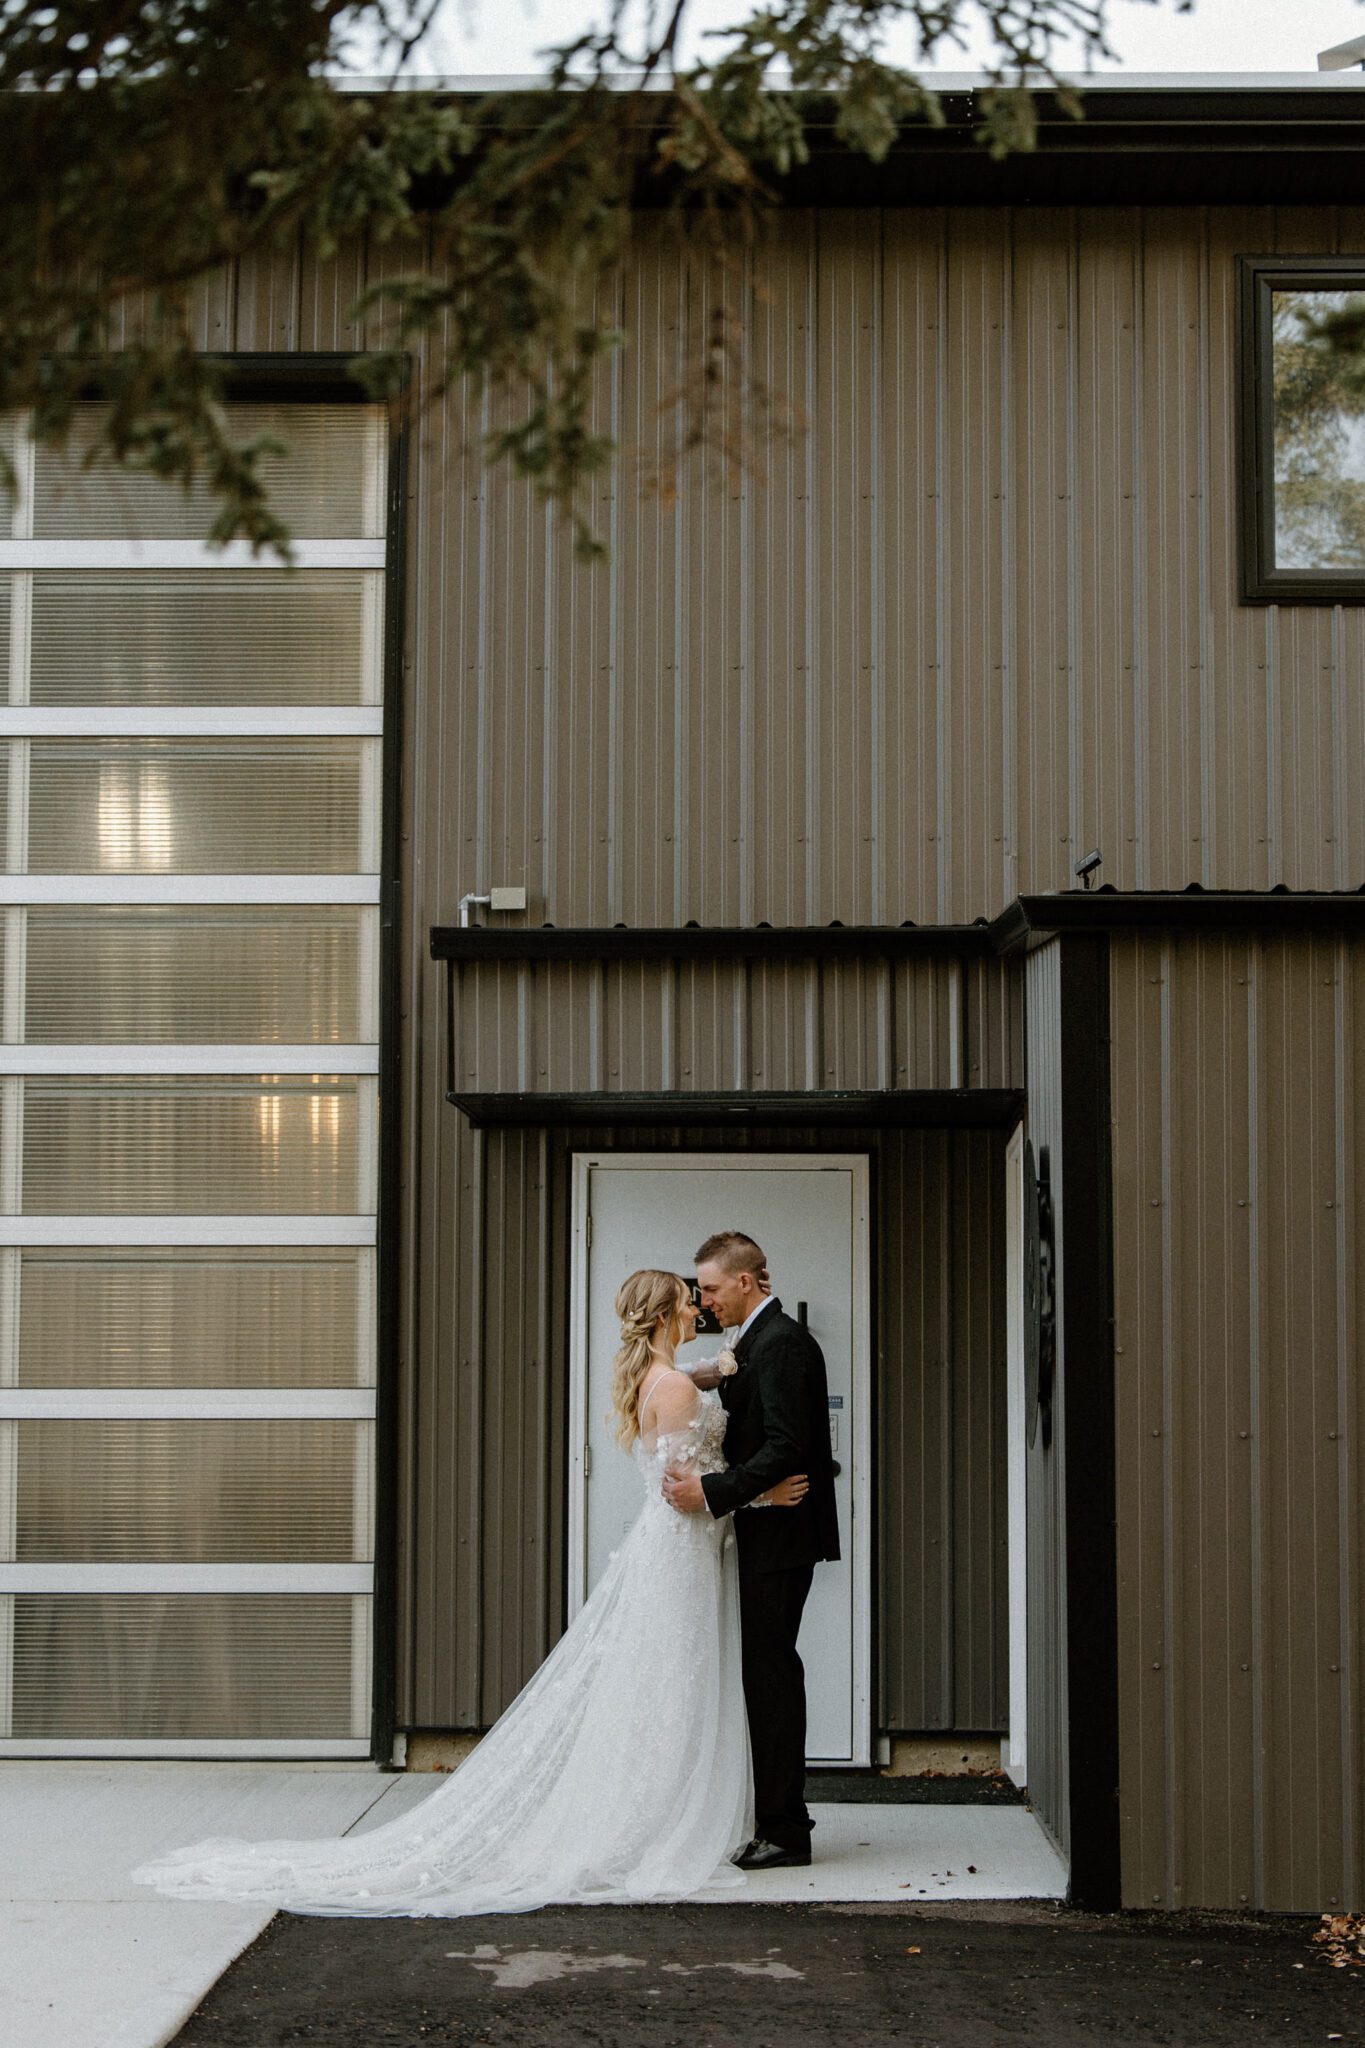 Far away portrait of bride and groom standing in front of 52 North Wedding Venue, warm and moody wedding inspiration. 